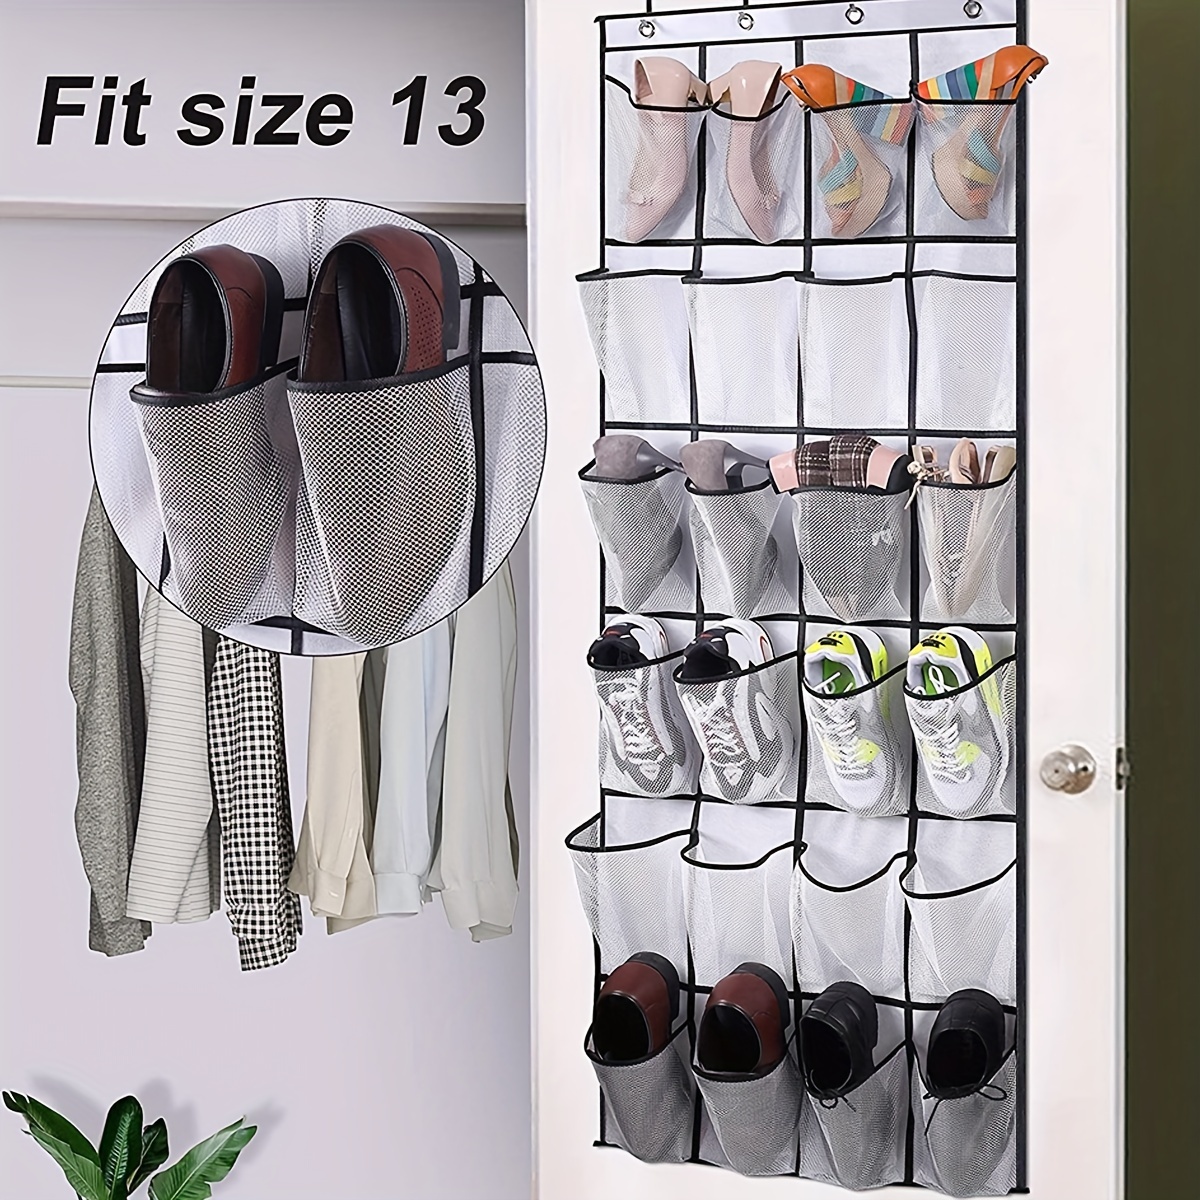 24Pockets Over The Door Shoe Organizer - Maximize Your Shoe Storage Space  with a Hanging Shoe Rack